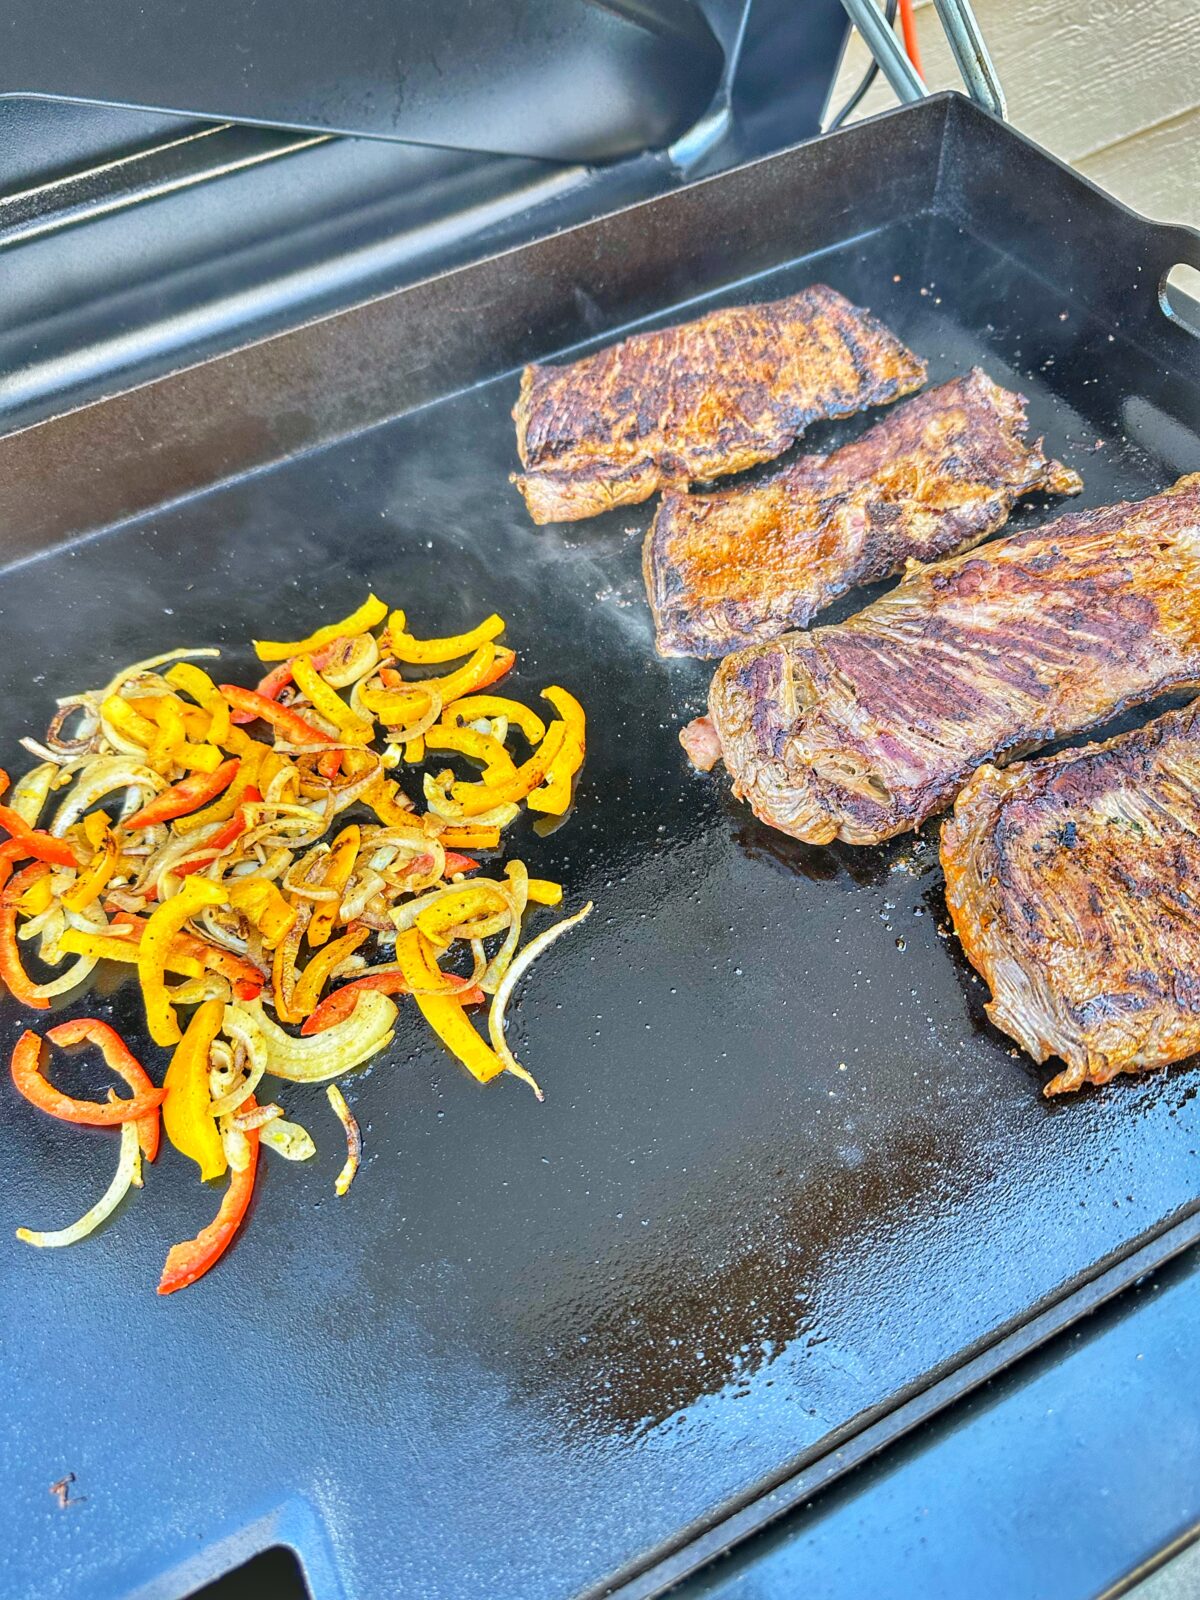 Skirt steak and peppers cooking on the griddle.